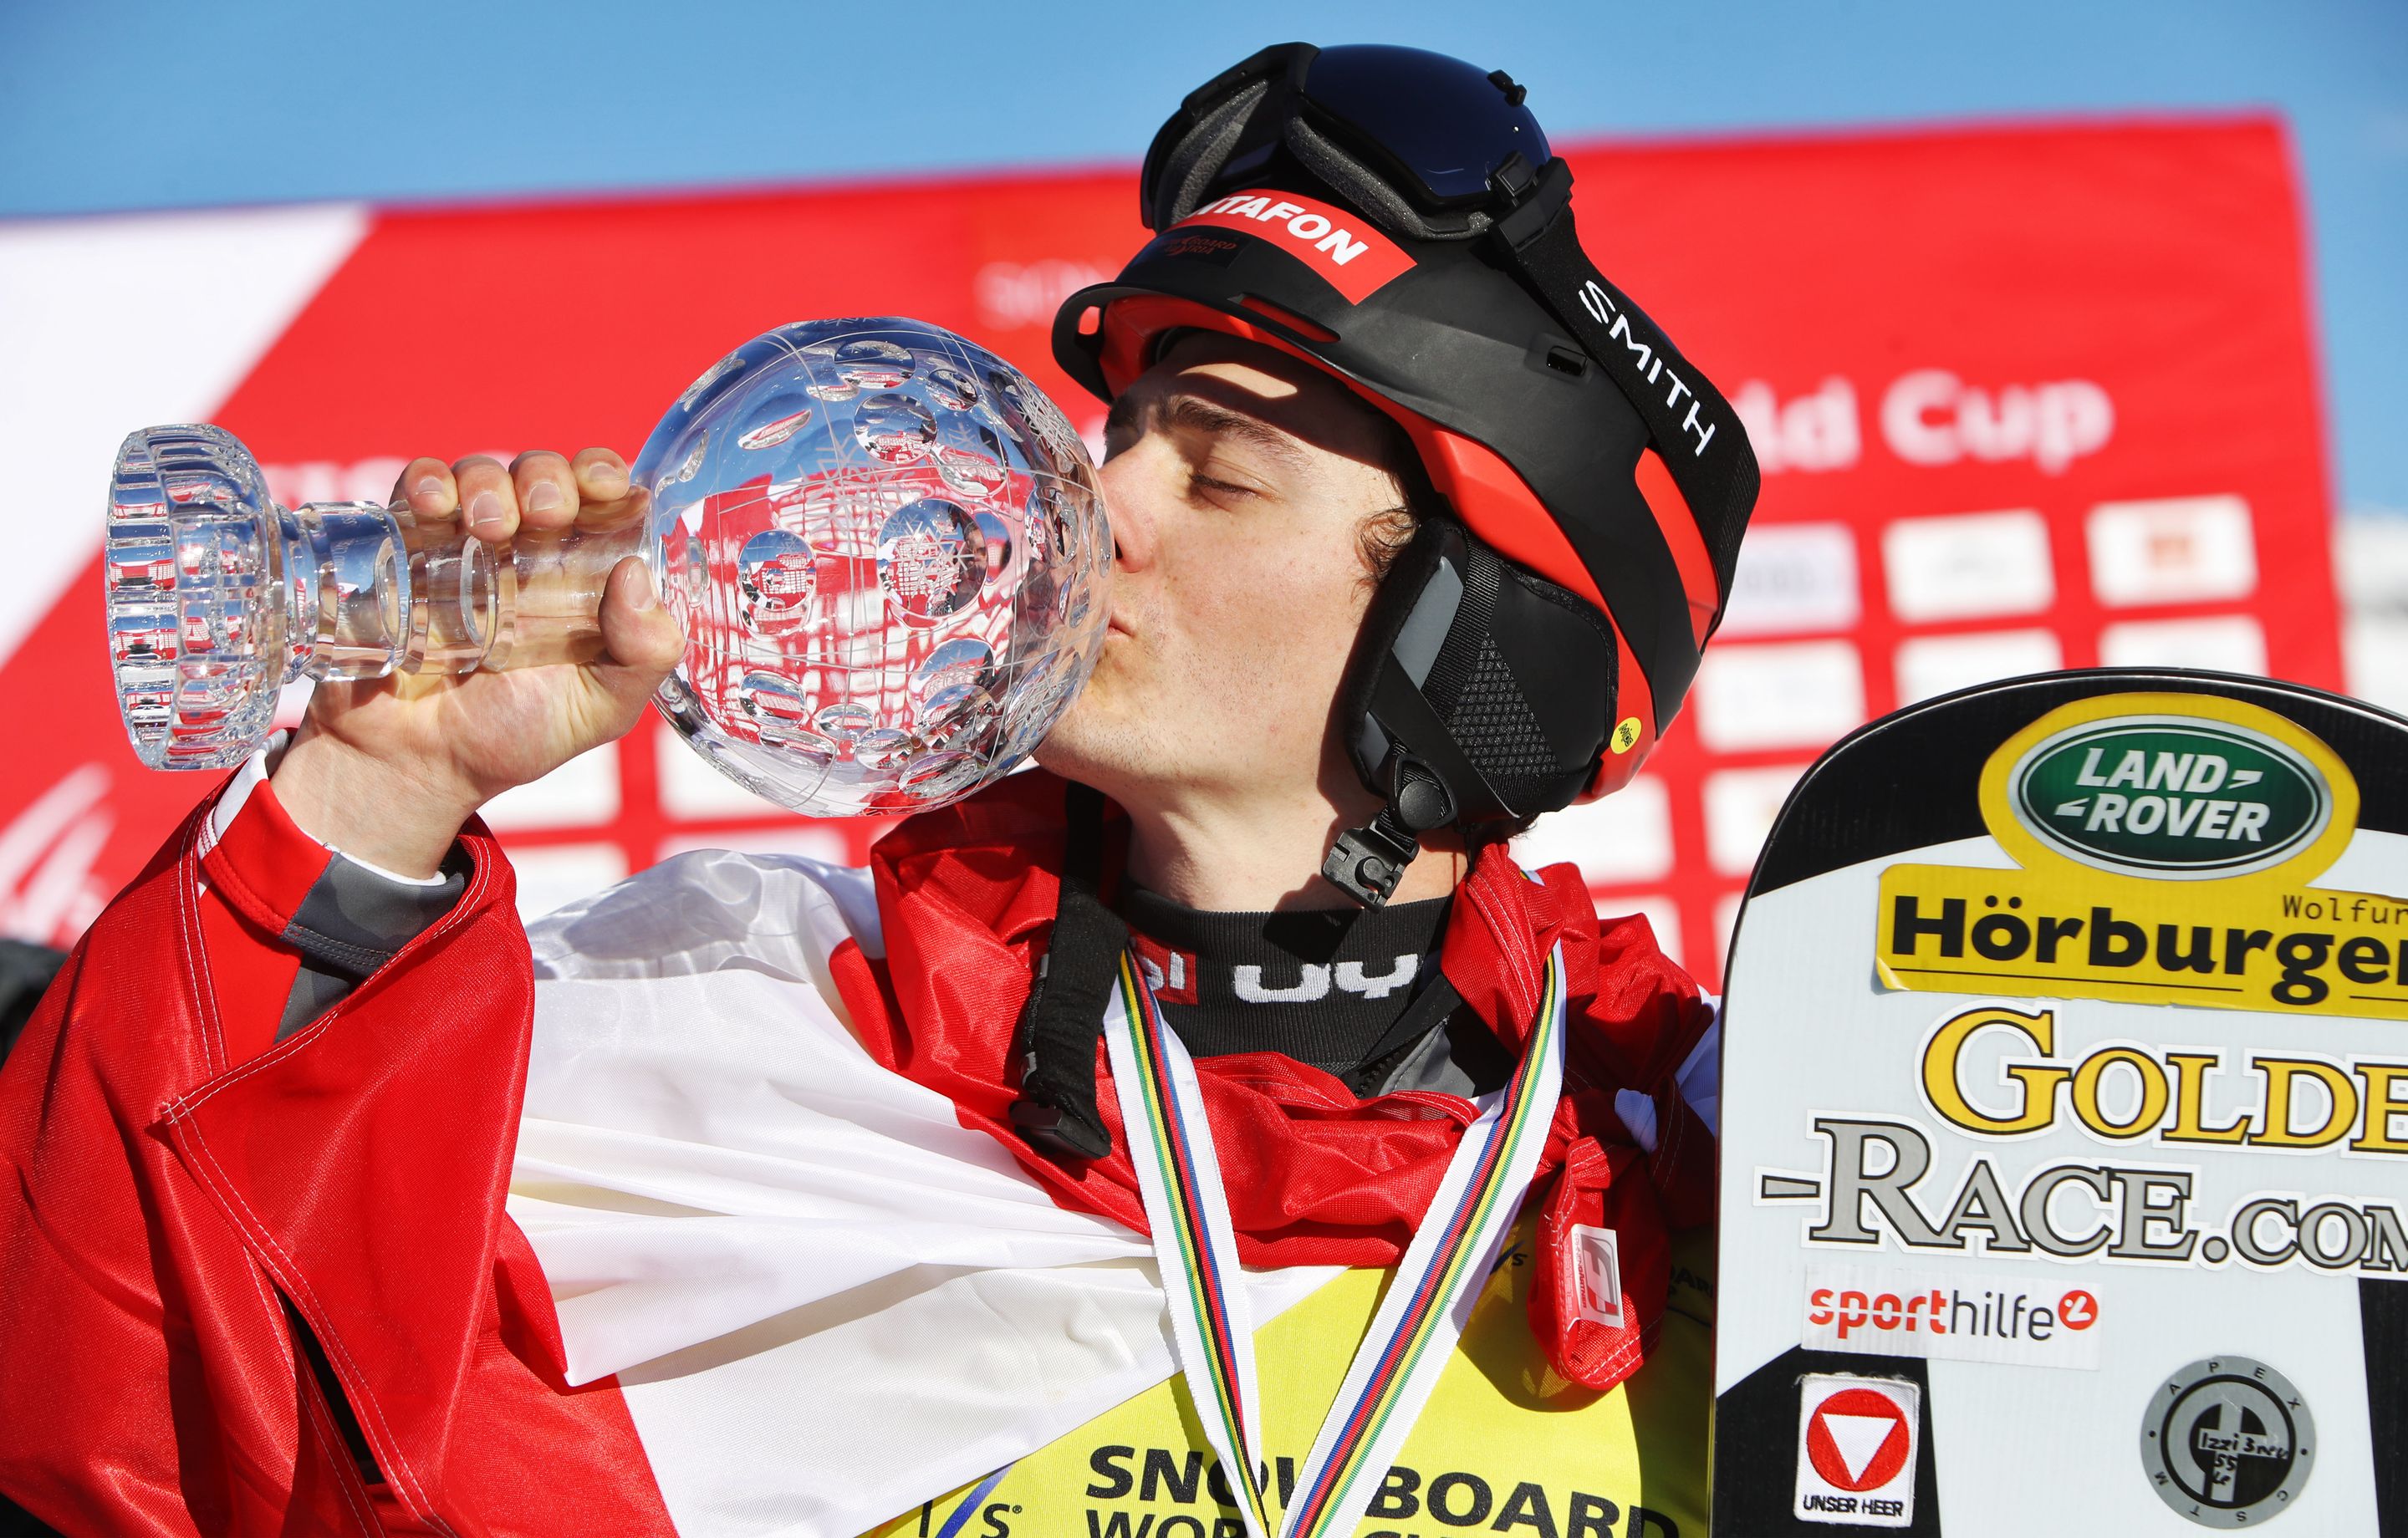 The experienced Austrian won three Crystal Globes in a row from 2019-2021